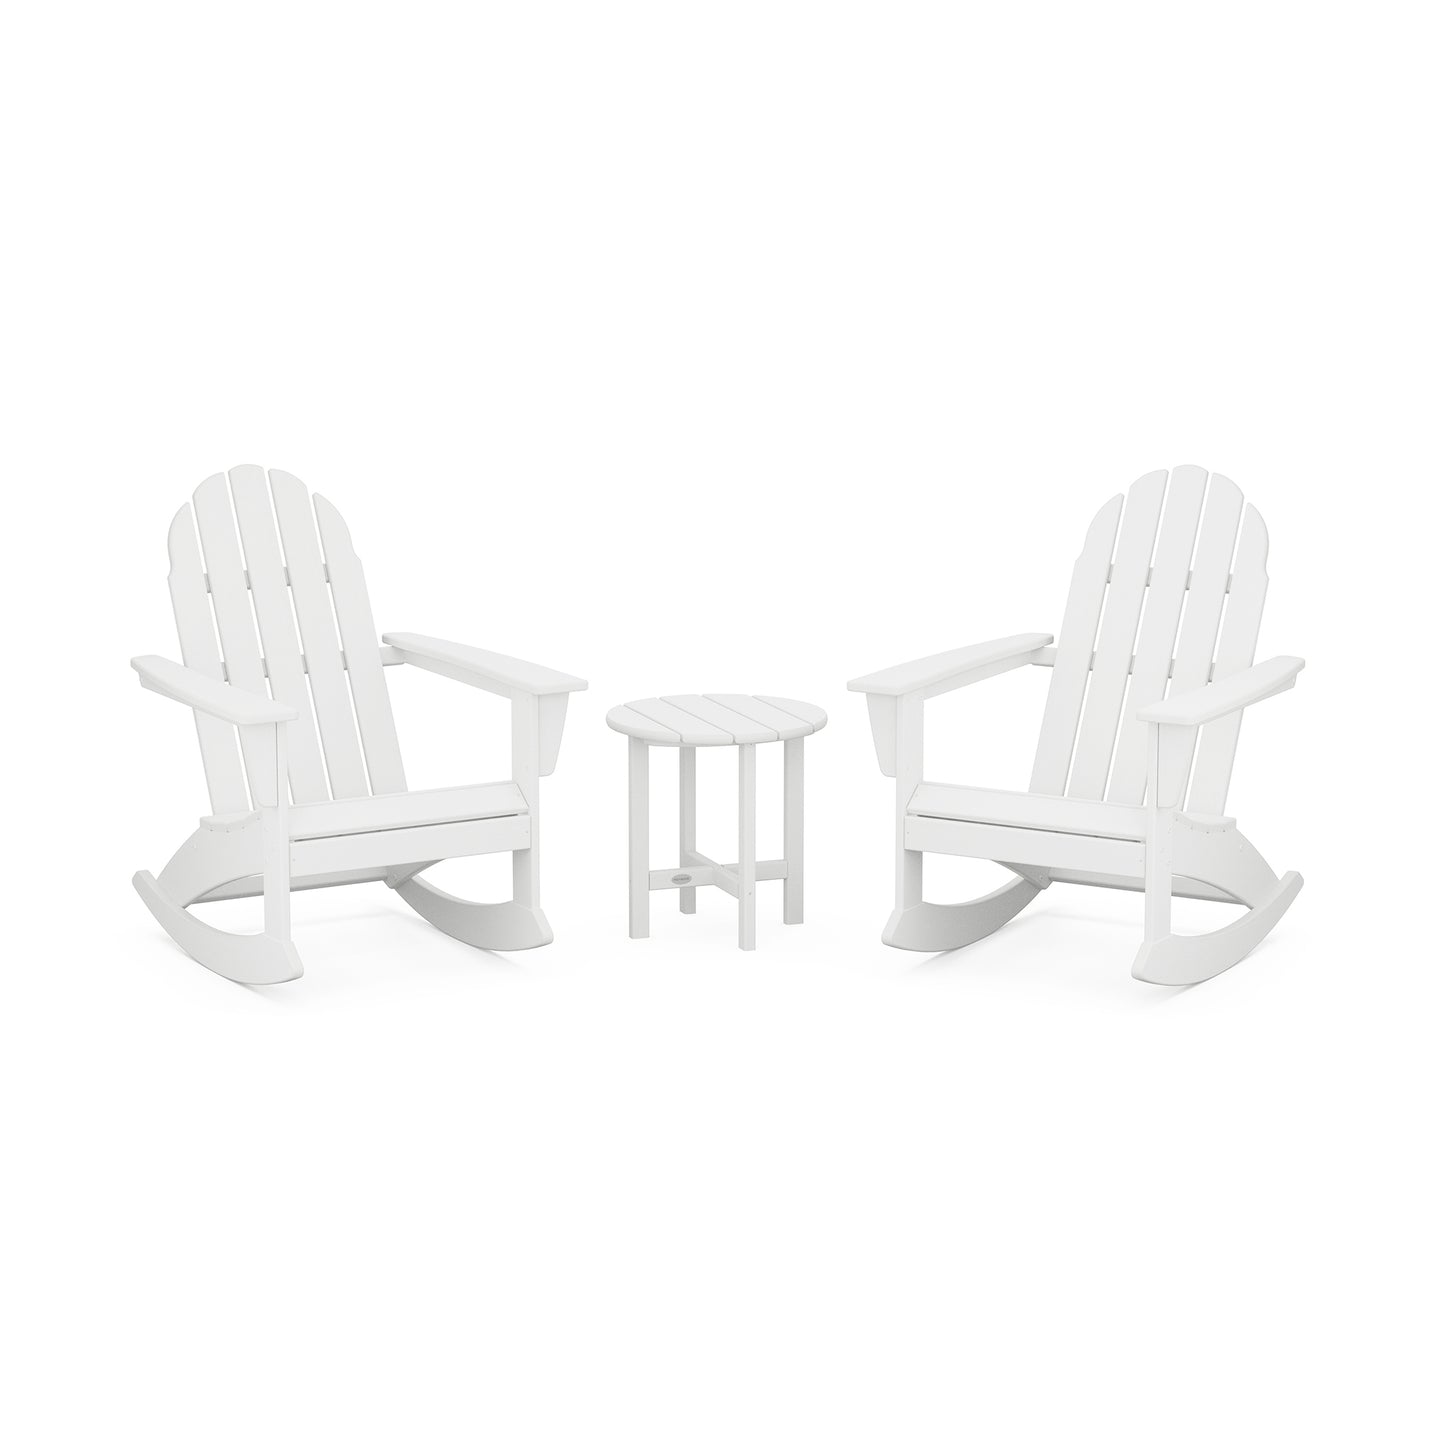 Two white POLYWOOD Vineyard 3-Piece Adirondack rocking chairs facing each other with a small round table between them, set against a plain white background.